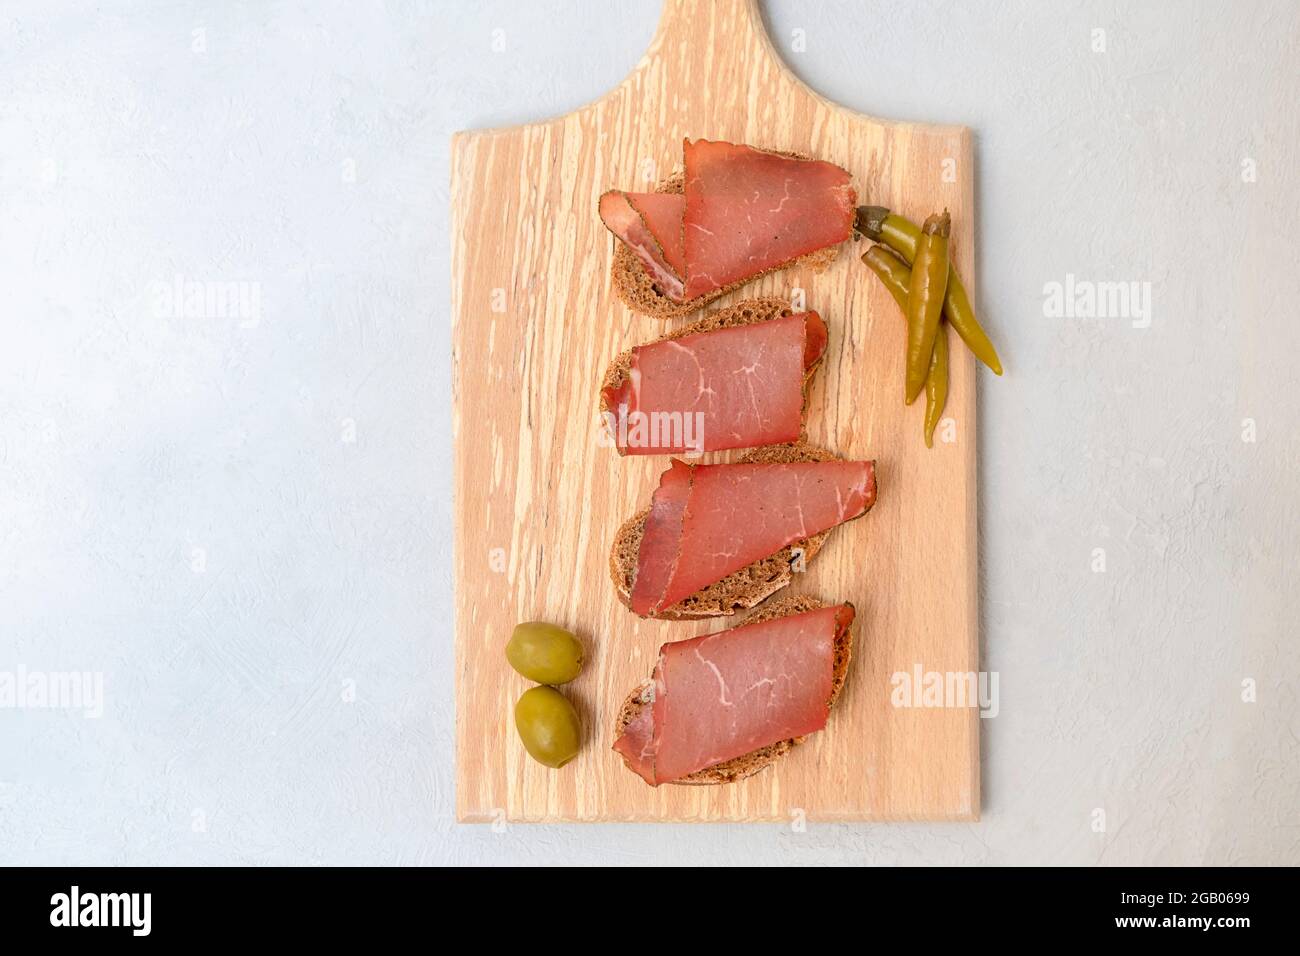 Top view of sandwiches with sliced dried meat served on cutting board on neutral grey background Stock Photo